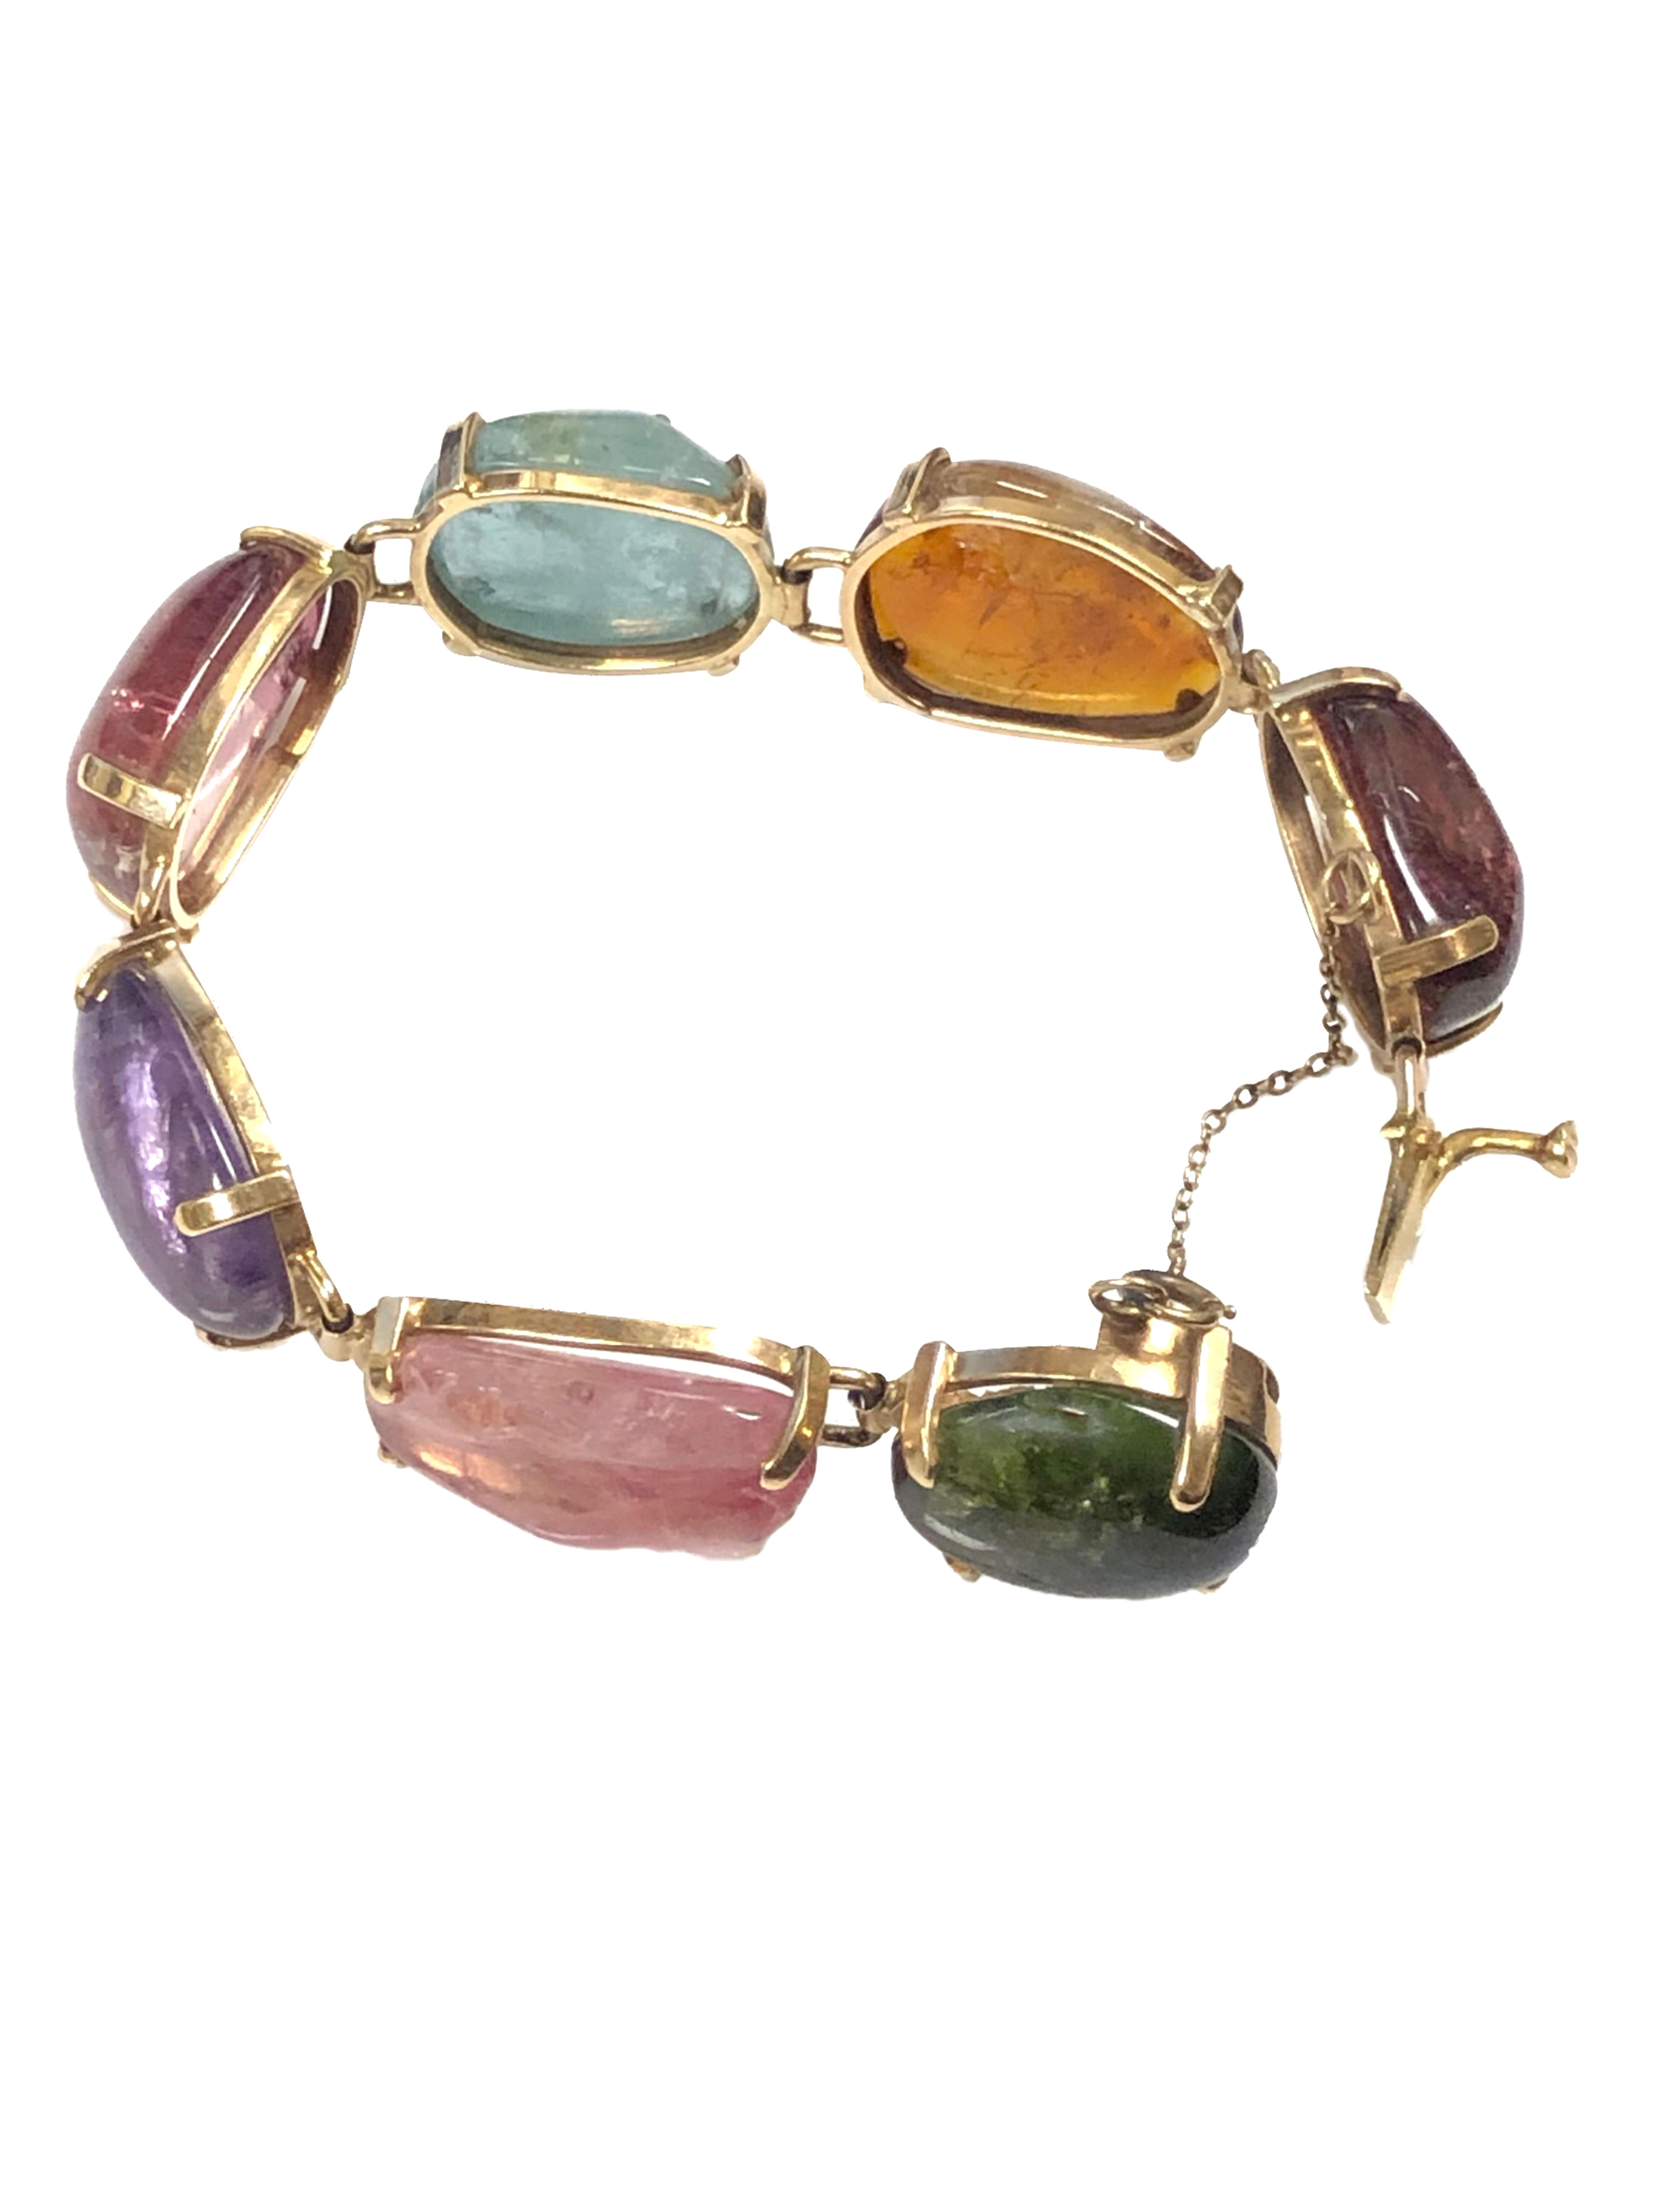 Circa 1960s 14K yellow Gold Bracelet Set with Large Cabochon Gem Stones in the style made famous by Seaman Schepps, the bracelet measures 7 1/2 inches in length 5/8 inch wide and is set with Tourmaline, Aquamarine, Amethyst, Garnet, Citrine, Peridot